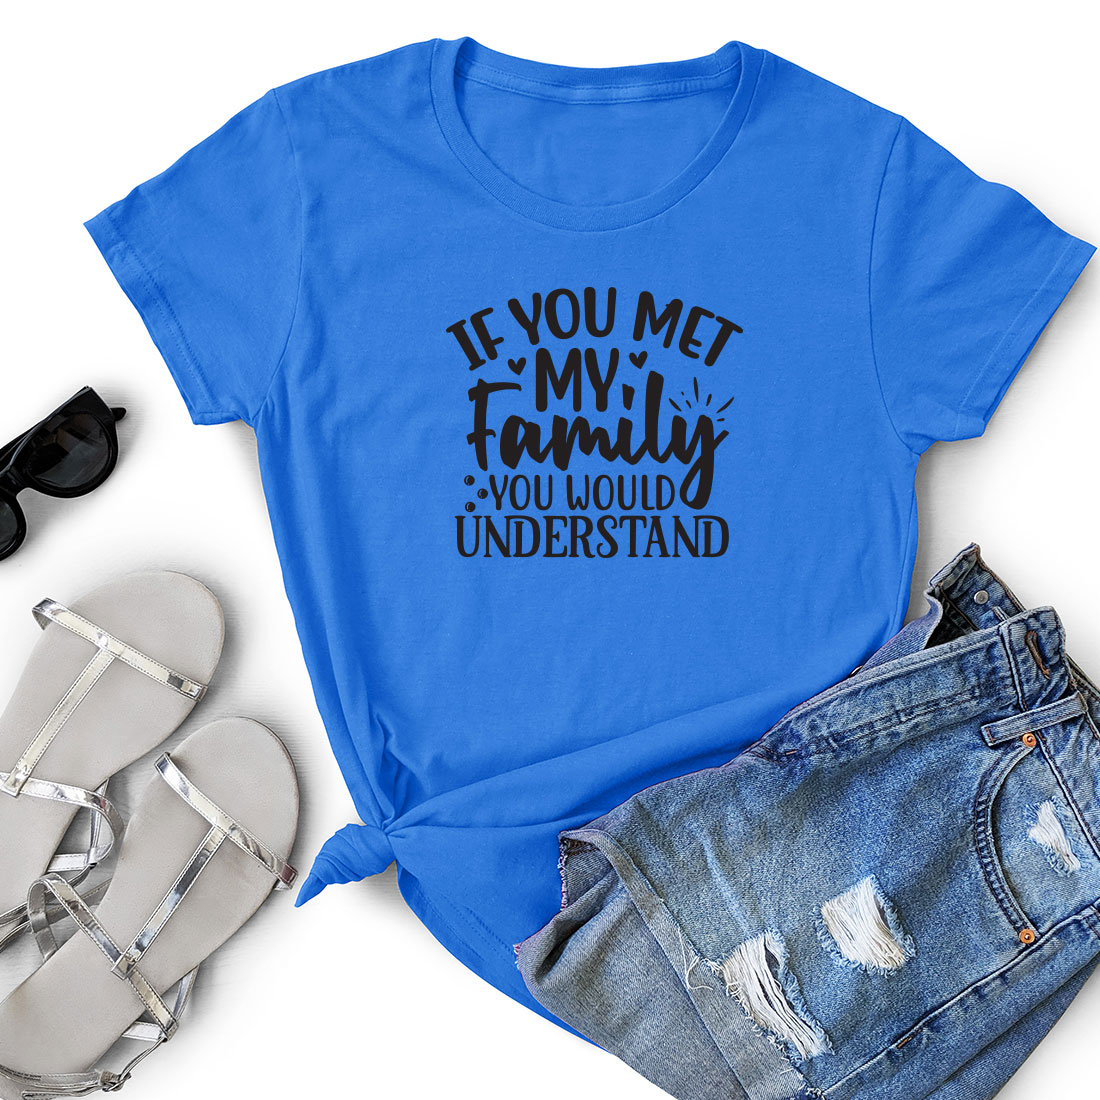 T - shirt that says if you met my family you would understand.